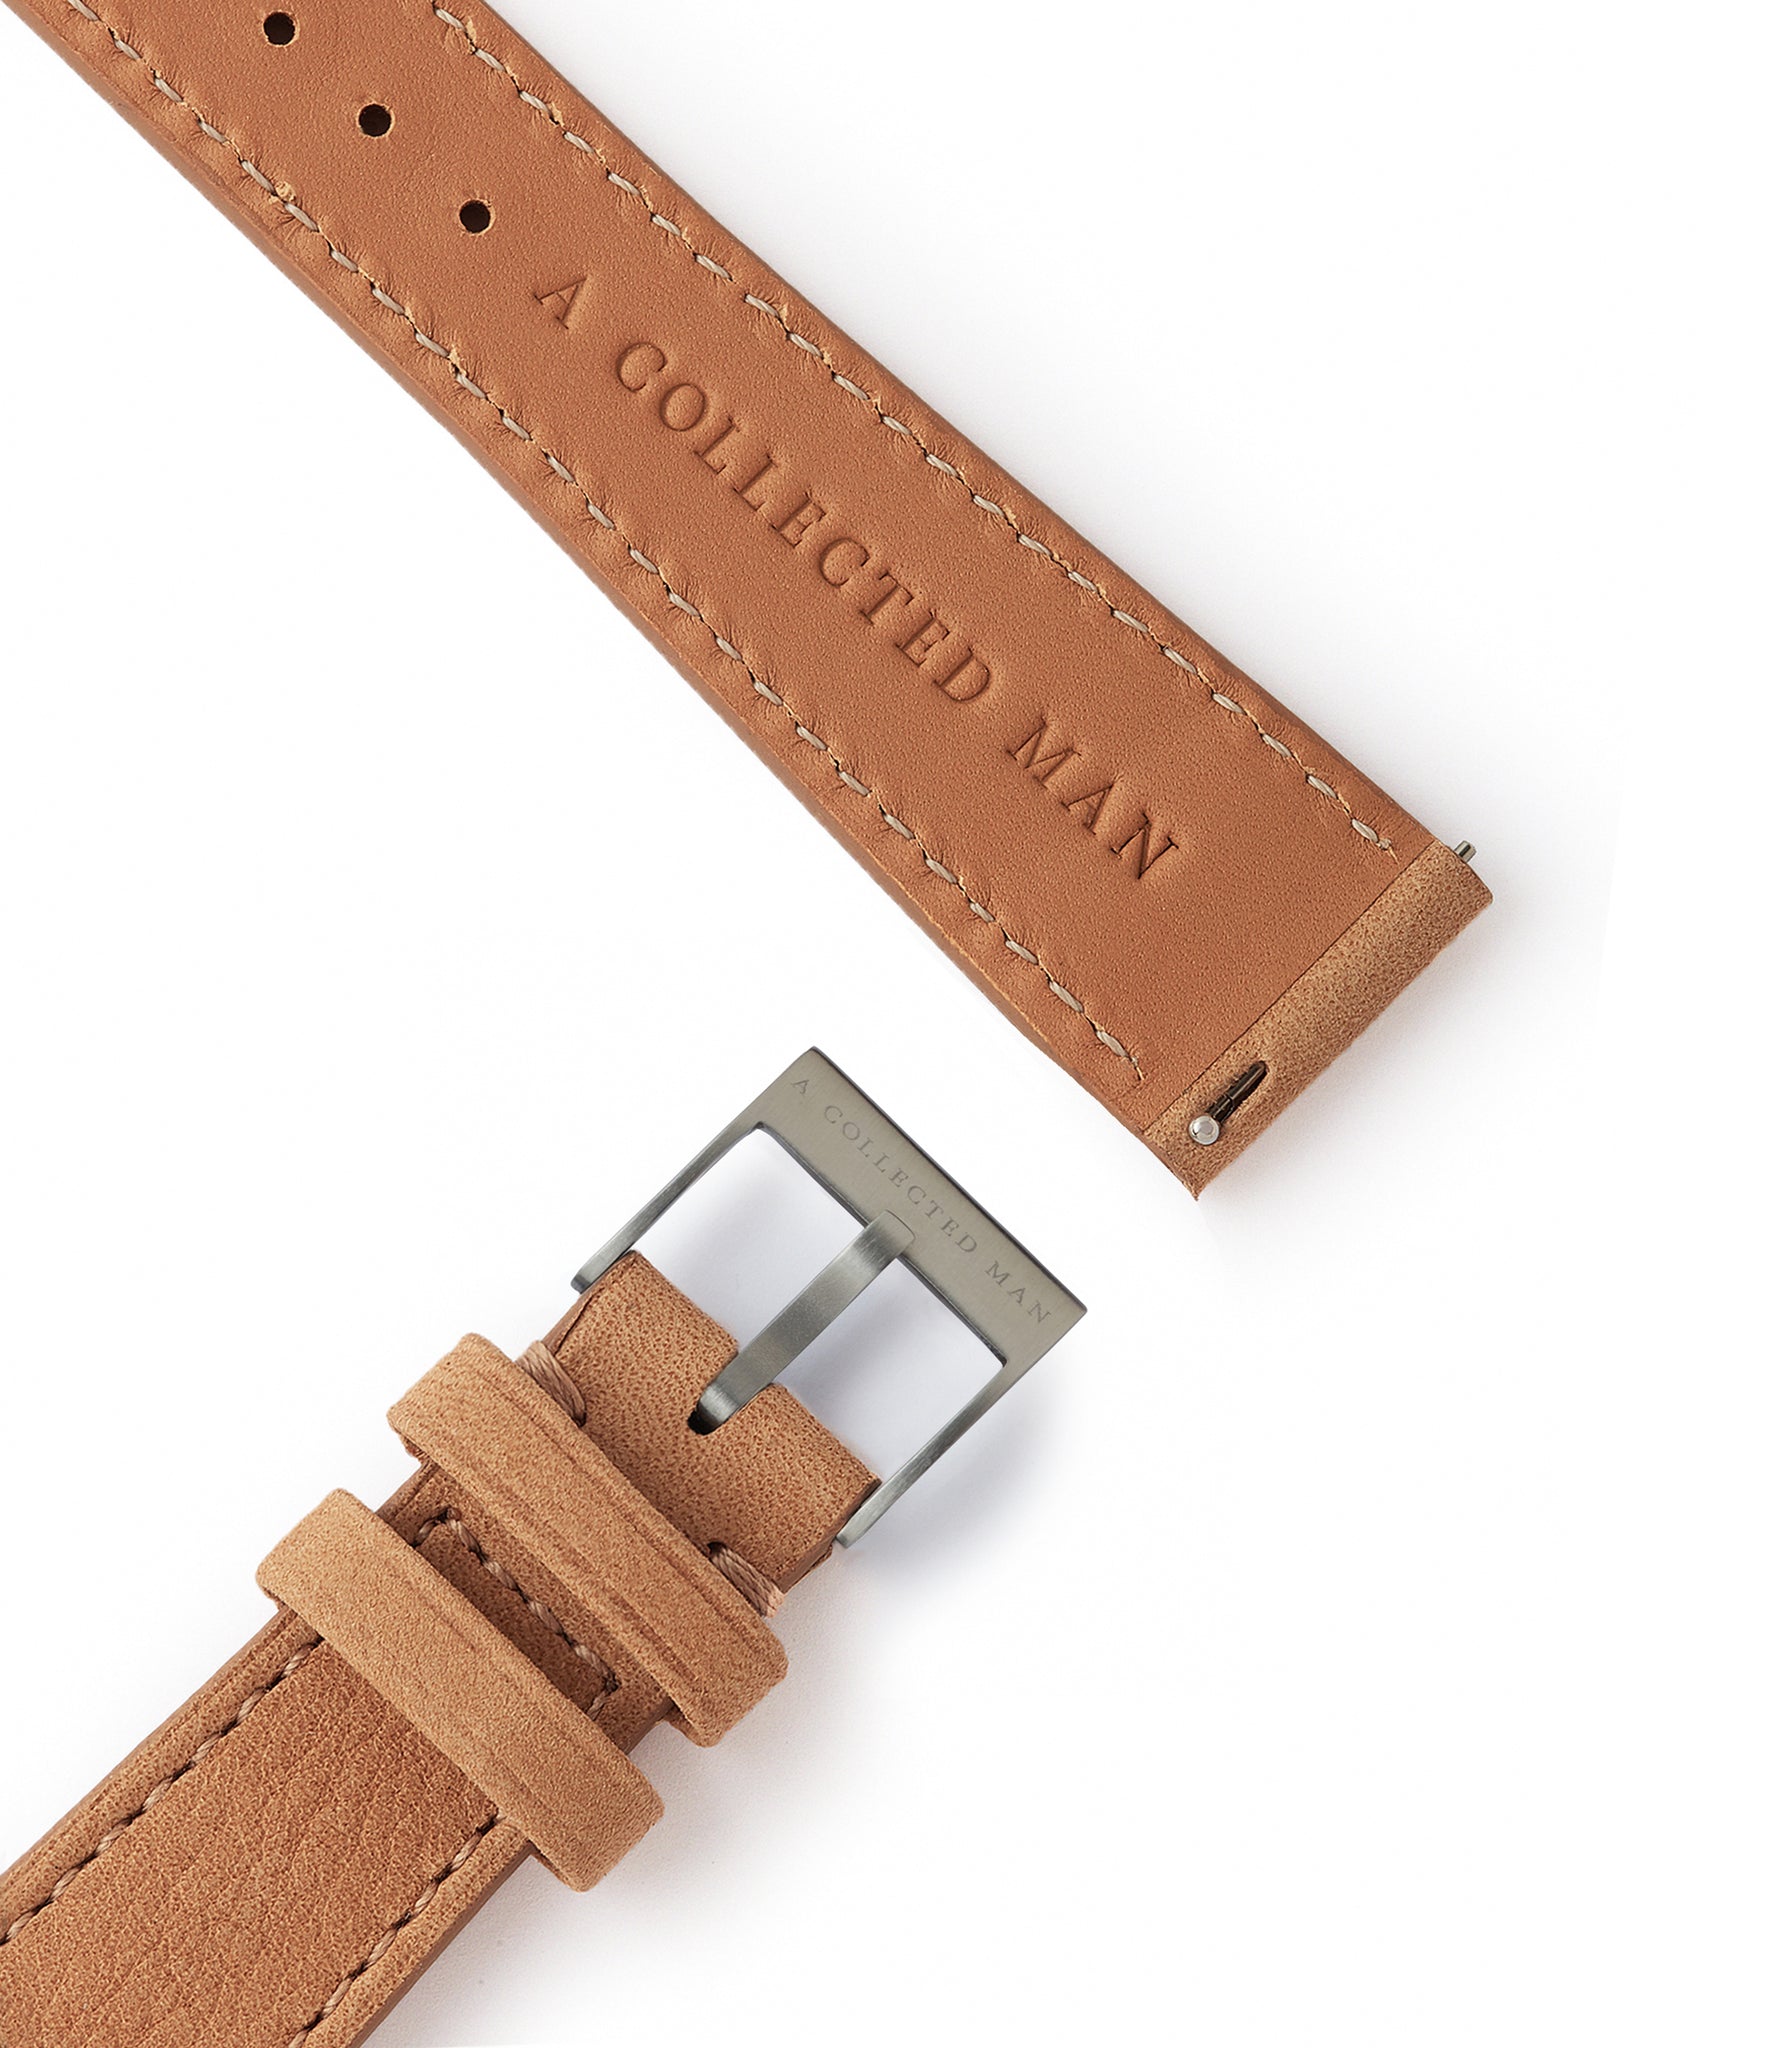 Buy nubuck quality watch strap in honeyed sun beige from A Collected Man London, in short or regular lengths. We are proud to offer these hand-crafted watch straps, thoughtfully made in Europe, to suit your watch. Available to order online for worldwide delivery.